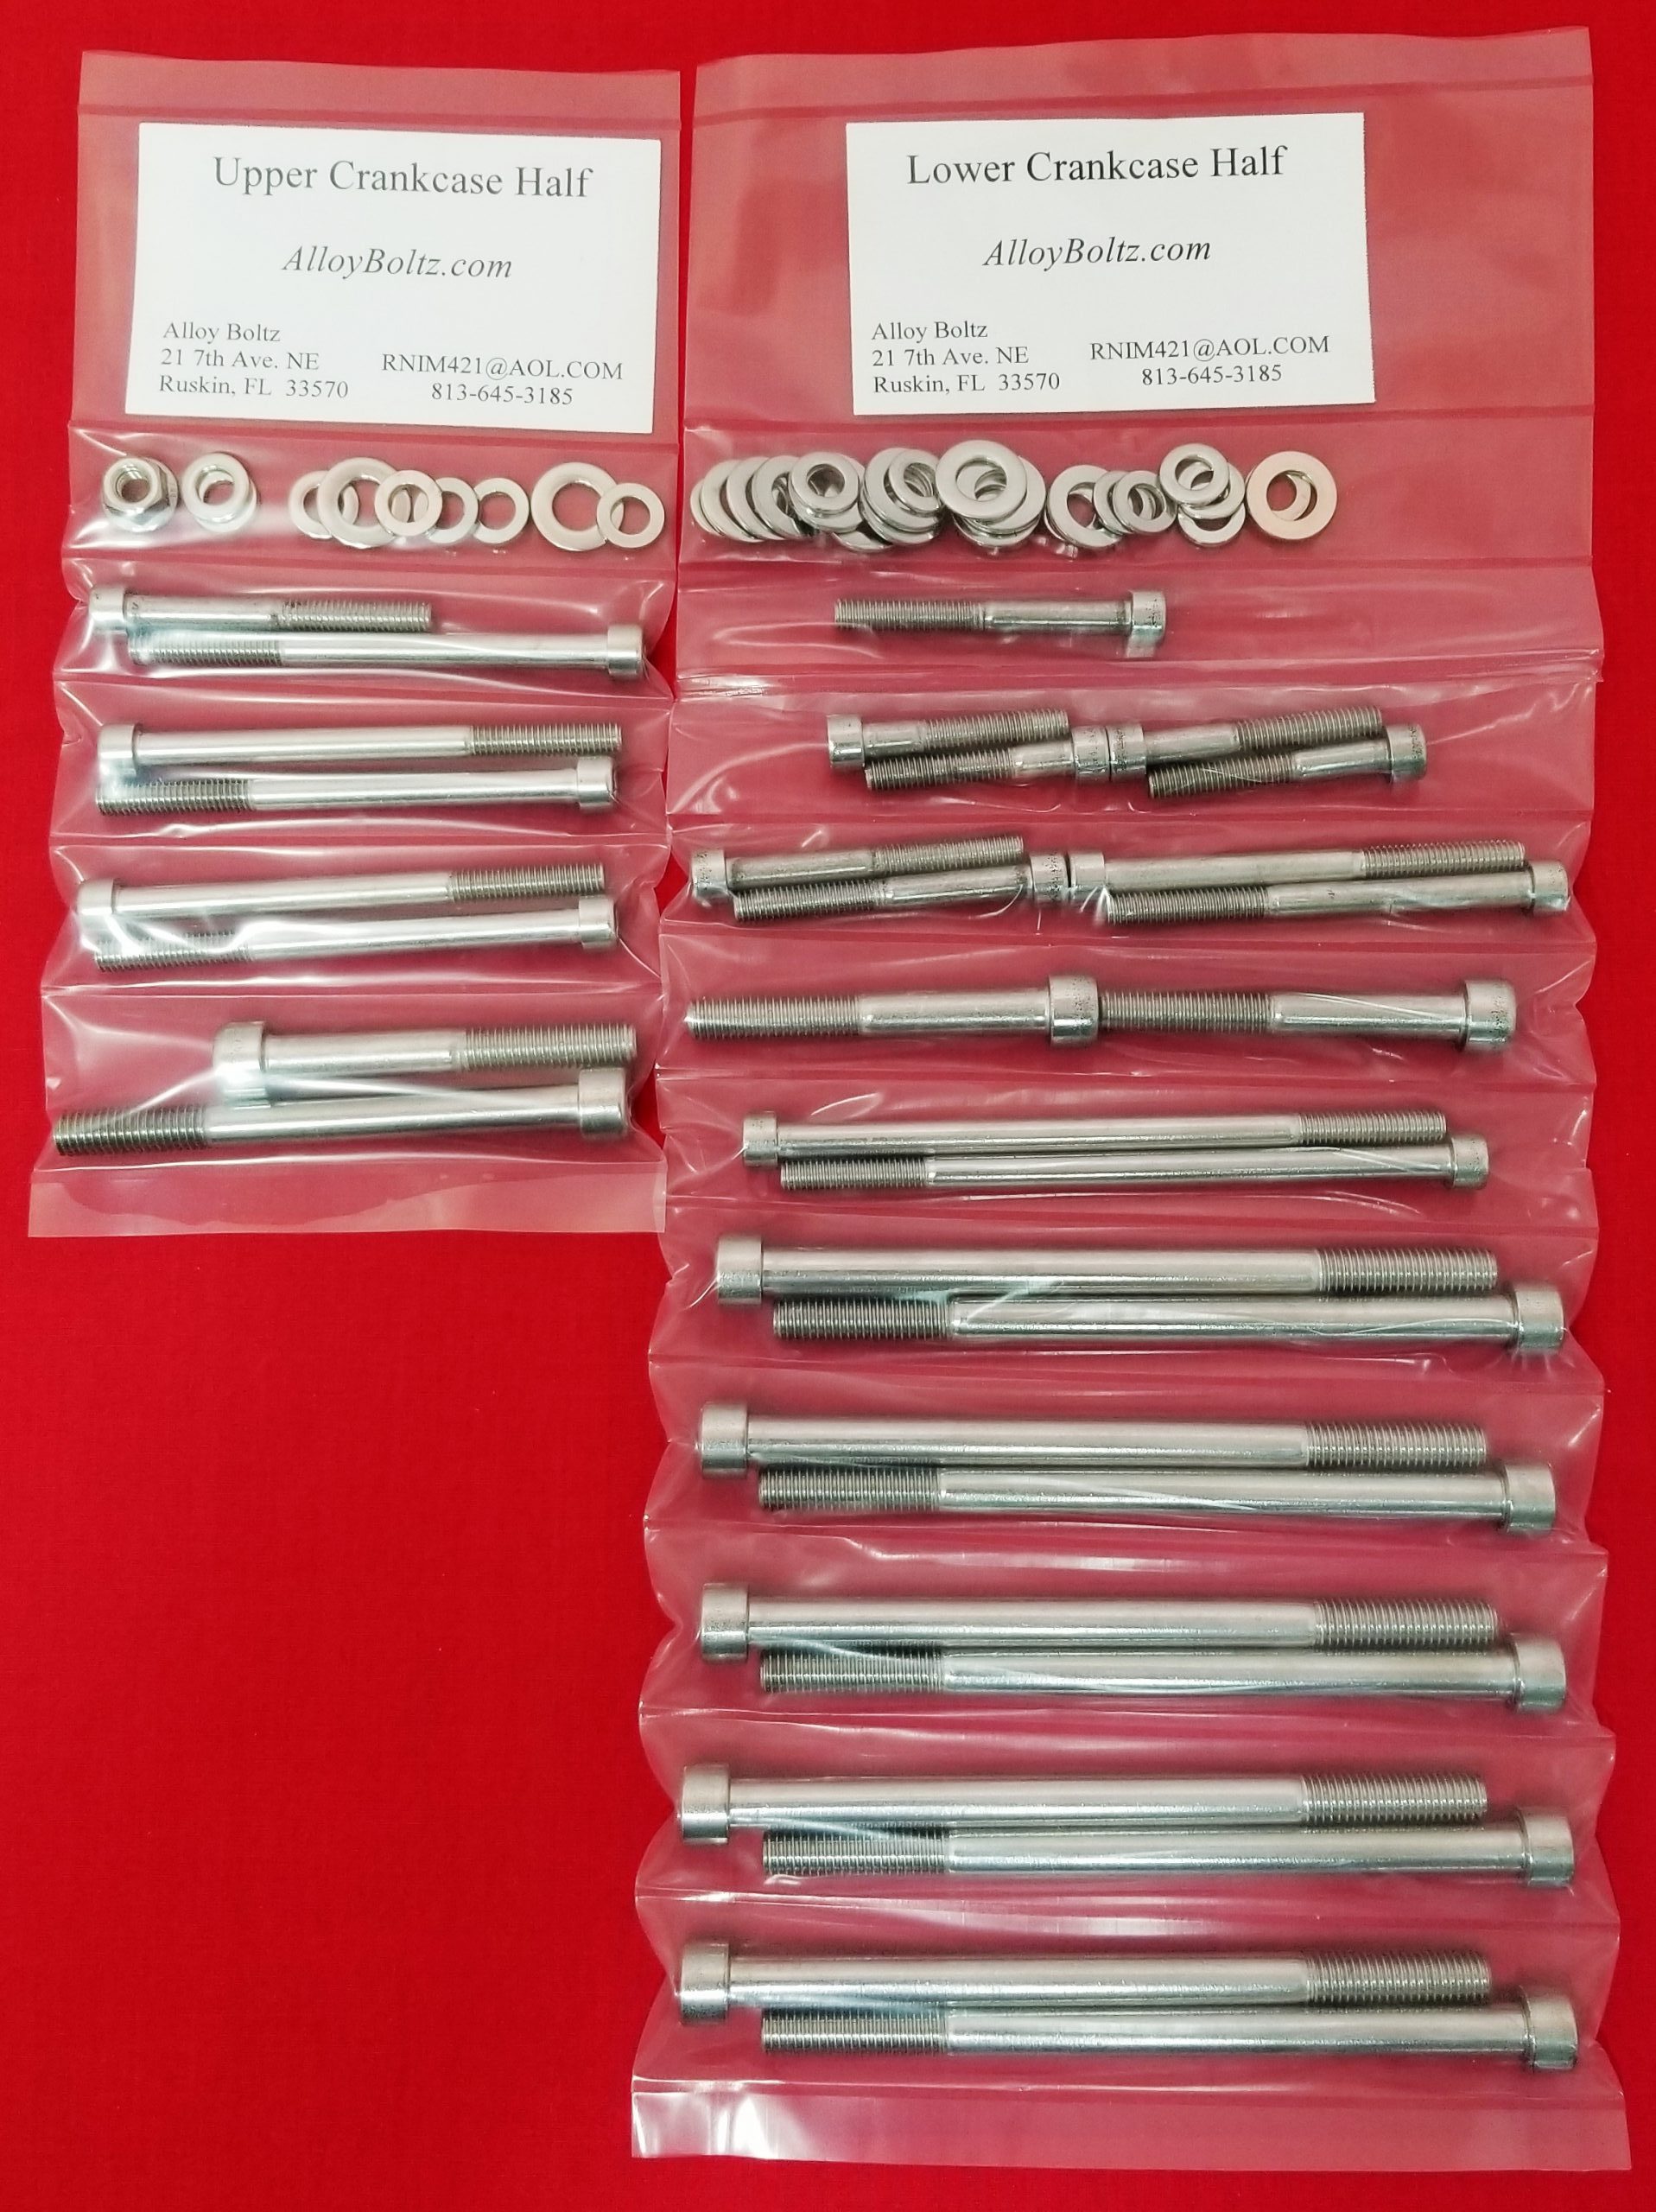 CamBox Stainless Allen Bolts Capscrews 65pc Honda CB750F/K 1975-8 Engine Covers